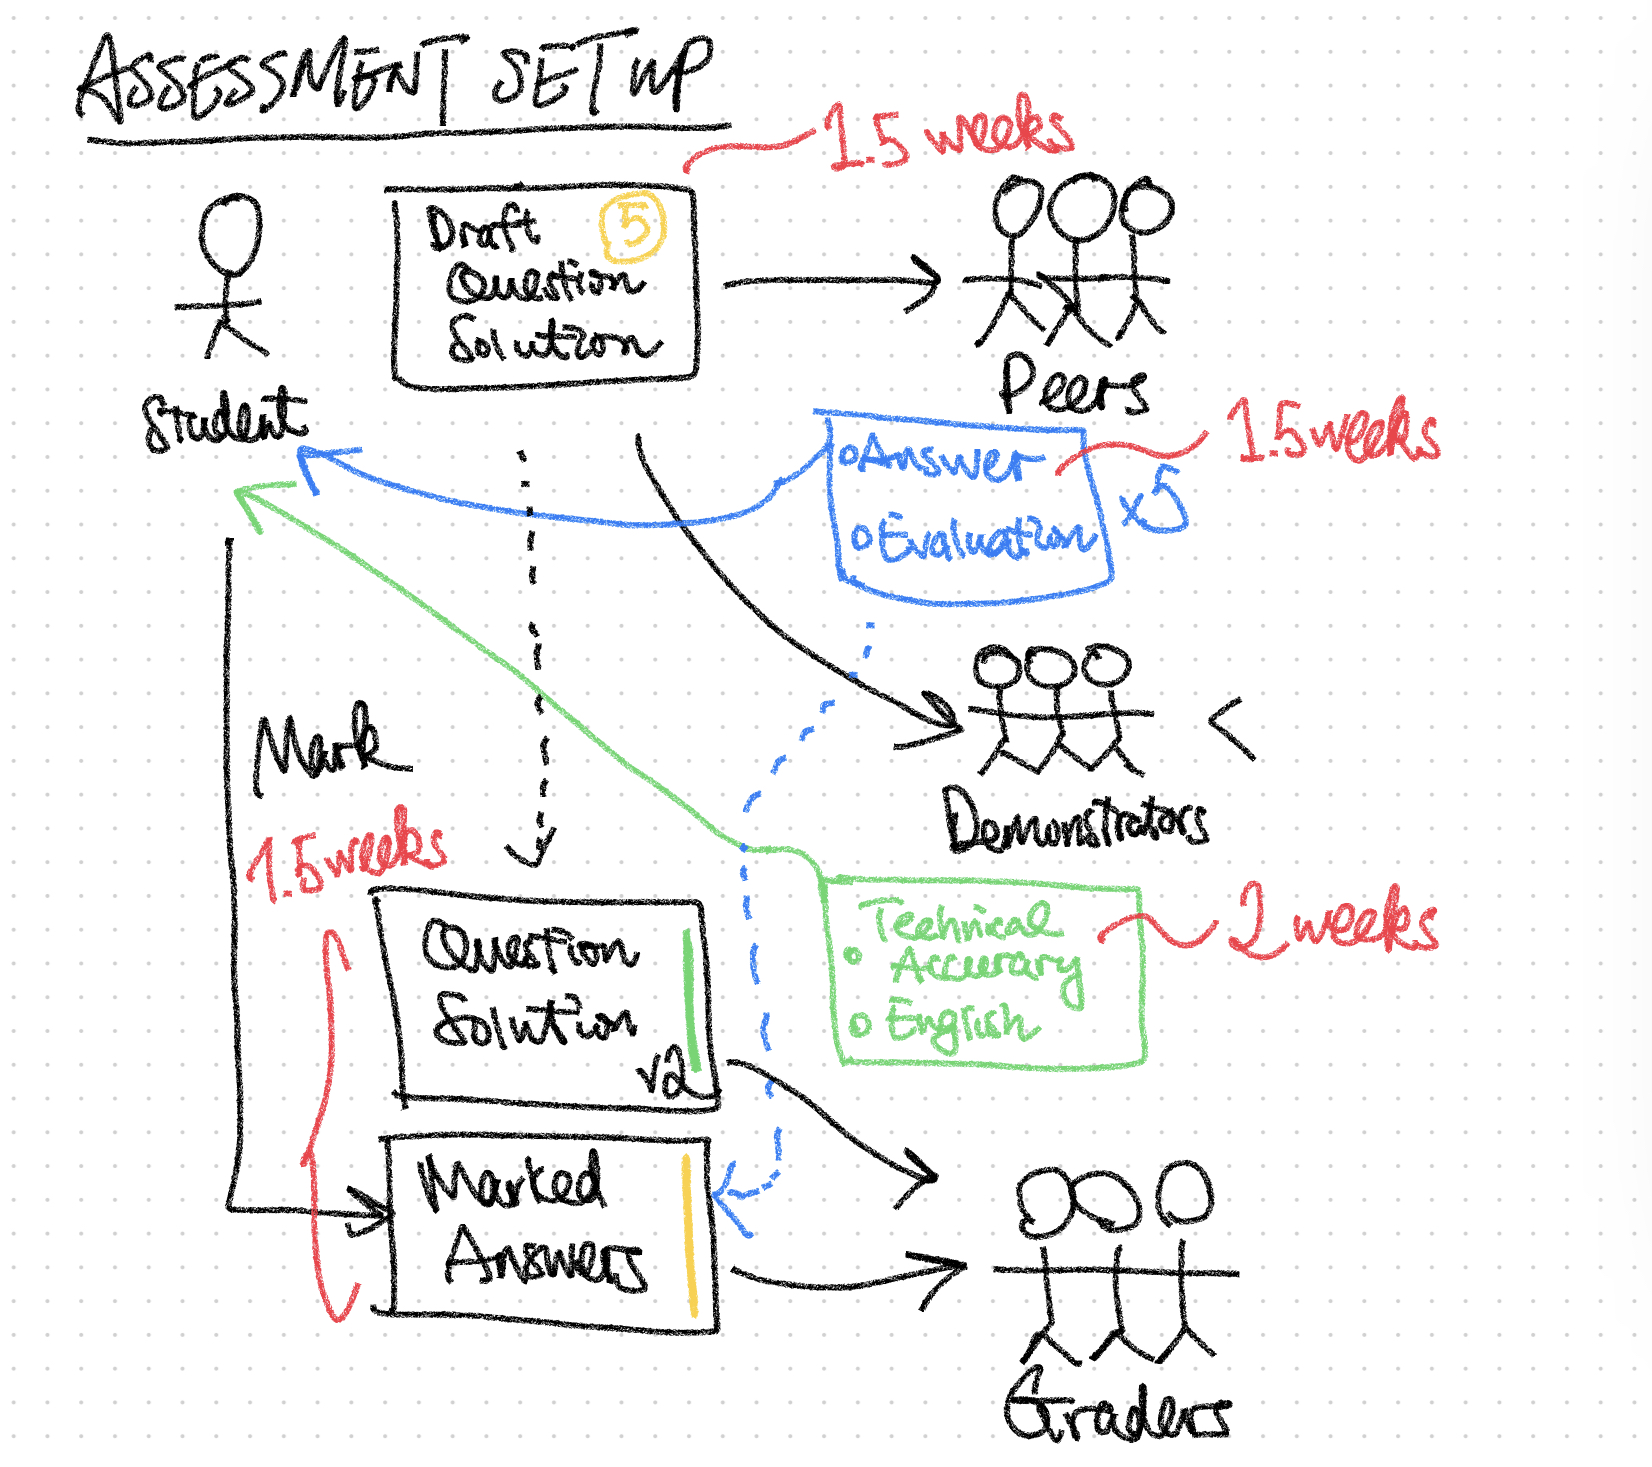 Workflow for Assessment in Co-Creation Project